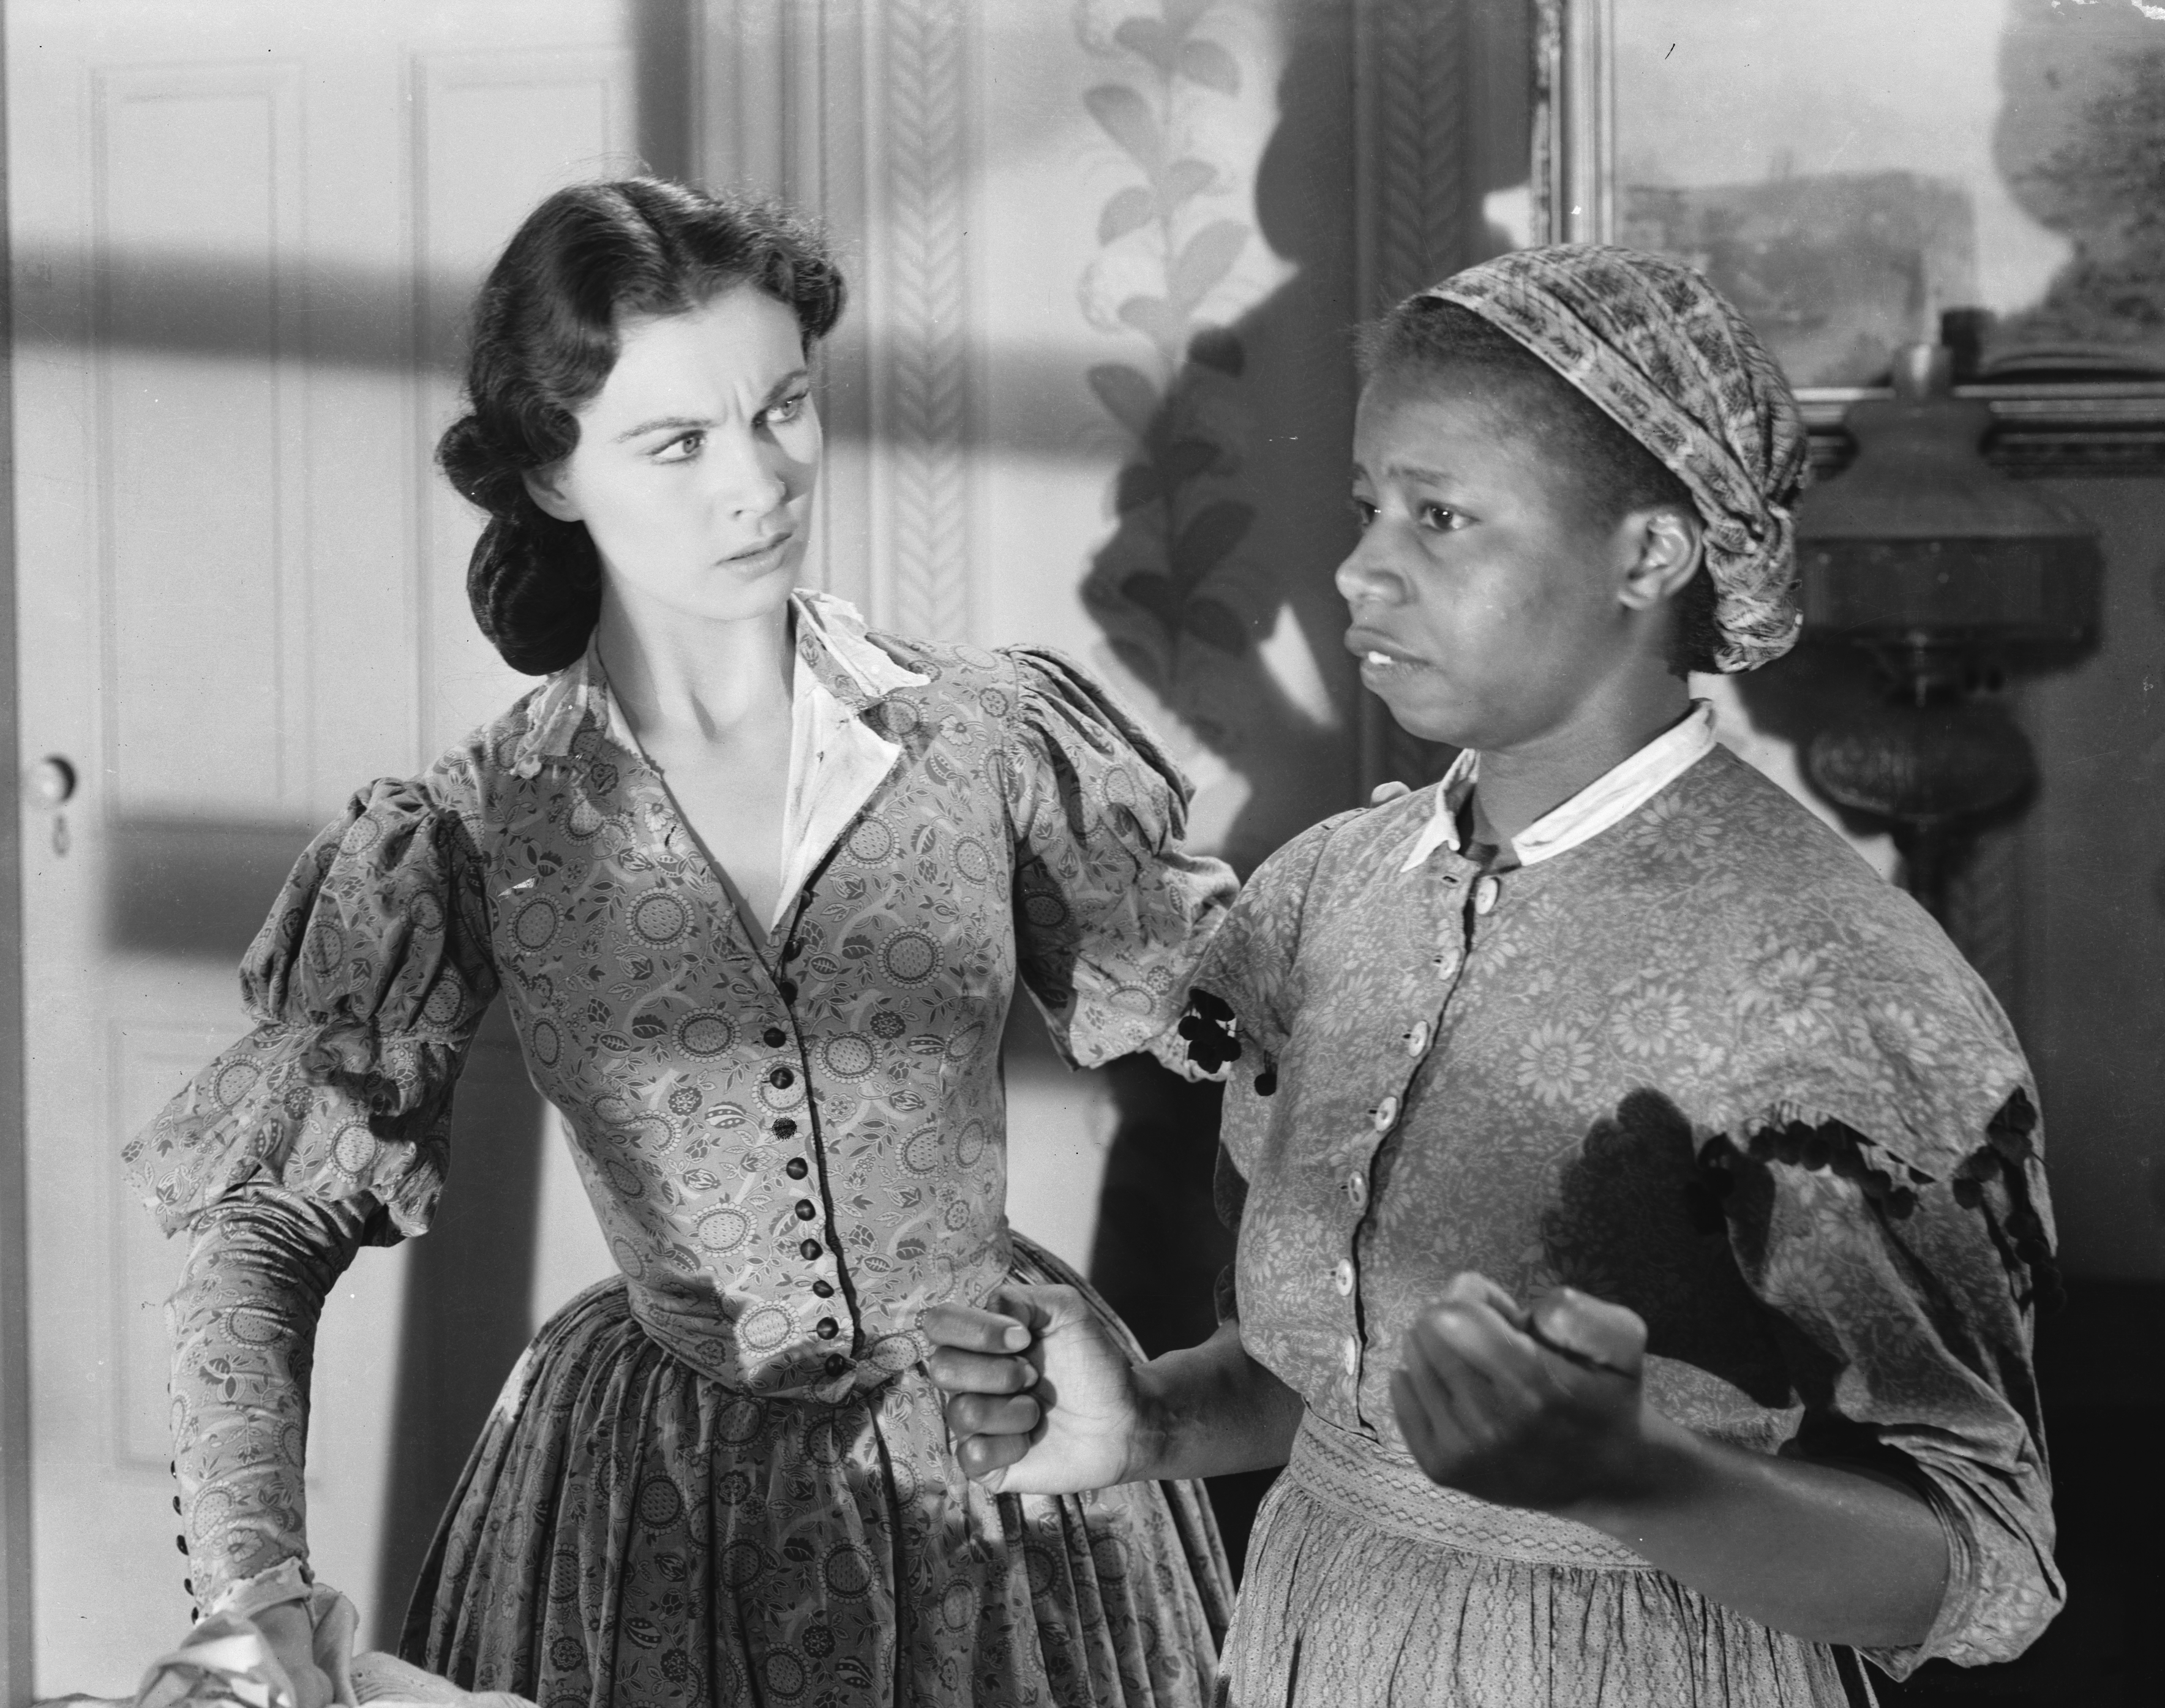 British actress Vivien Leigh with Butterfly McQueen in a scene from the American civil war epic 'Gone With the Wind'.  (Photo via John Kobal Foundation/Getty Images)